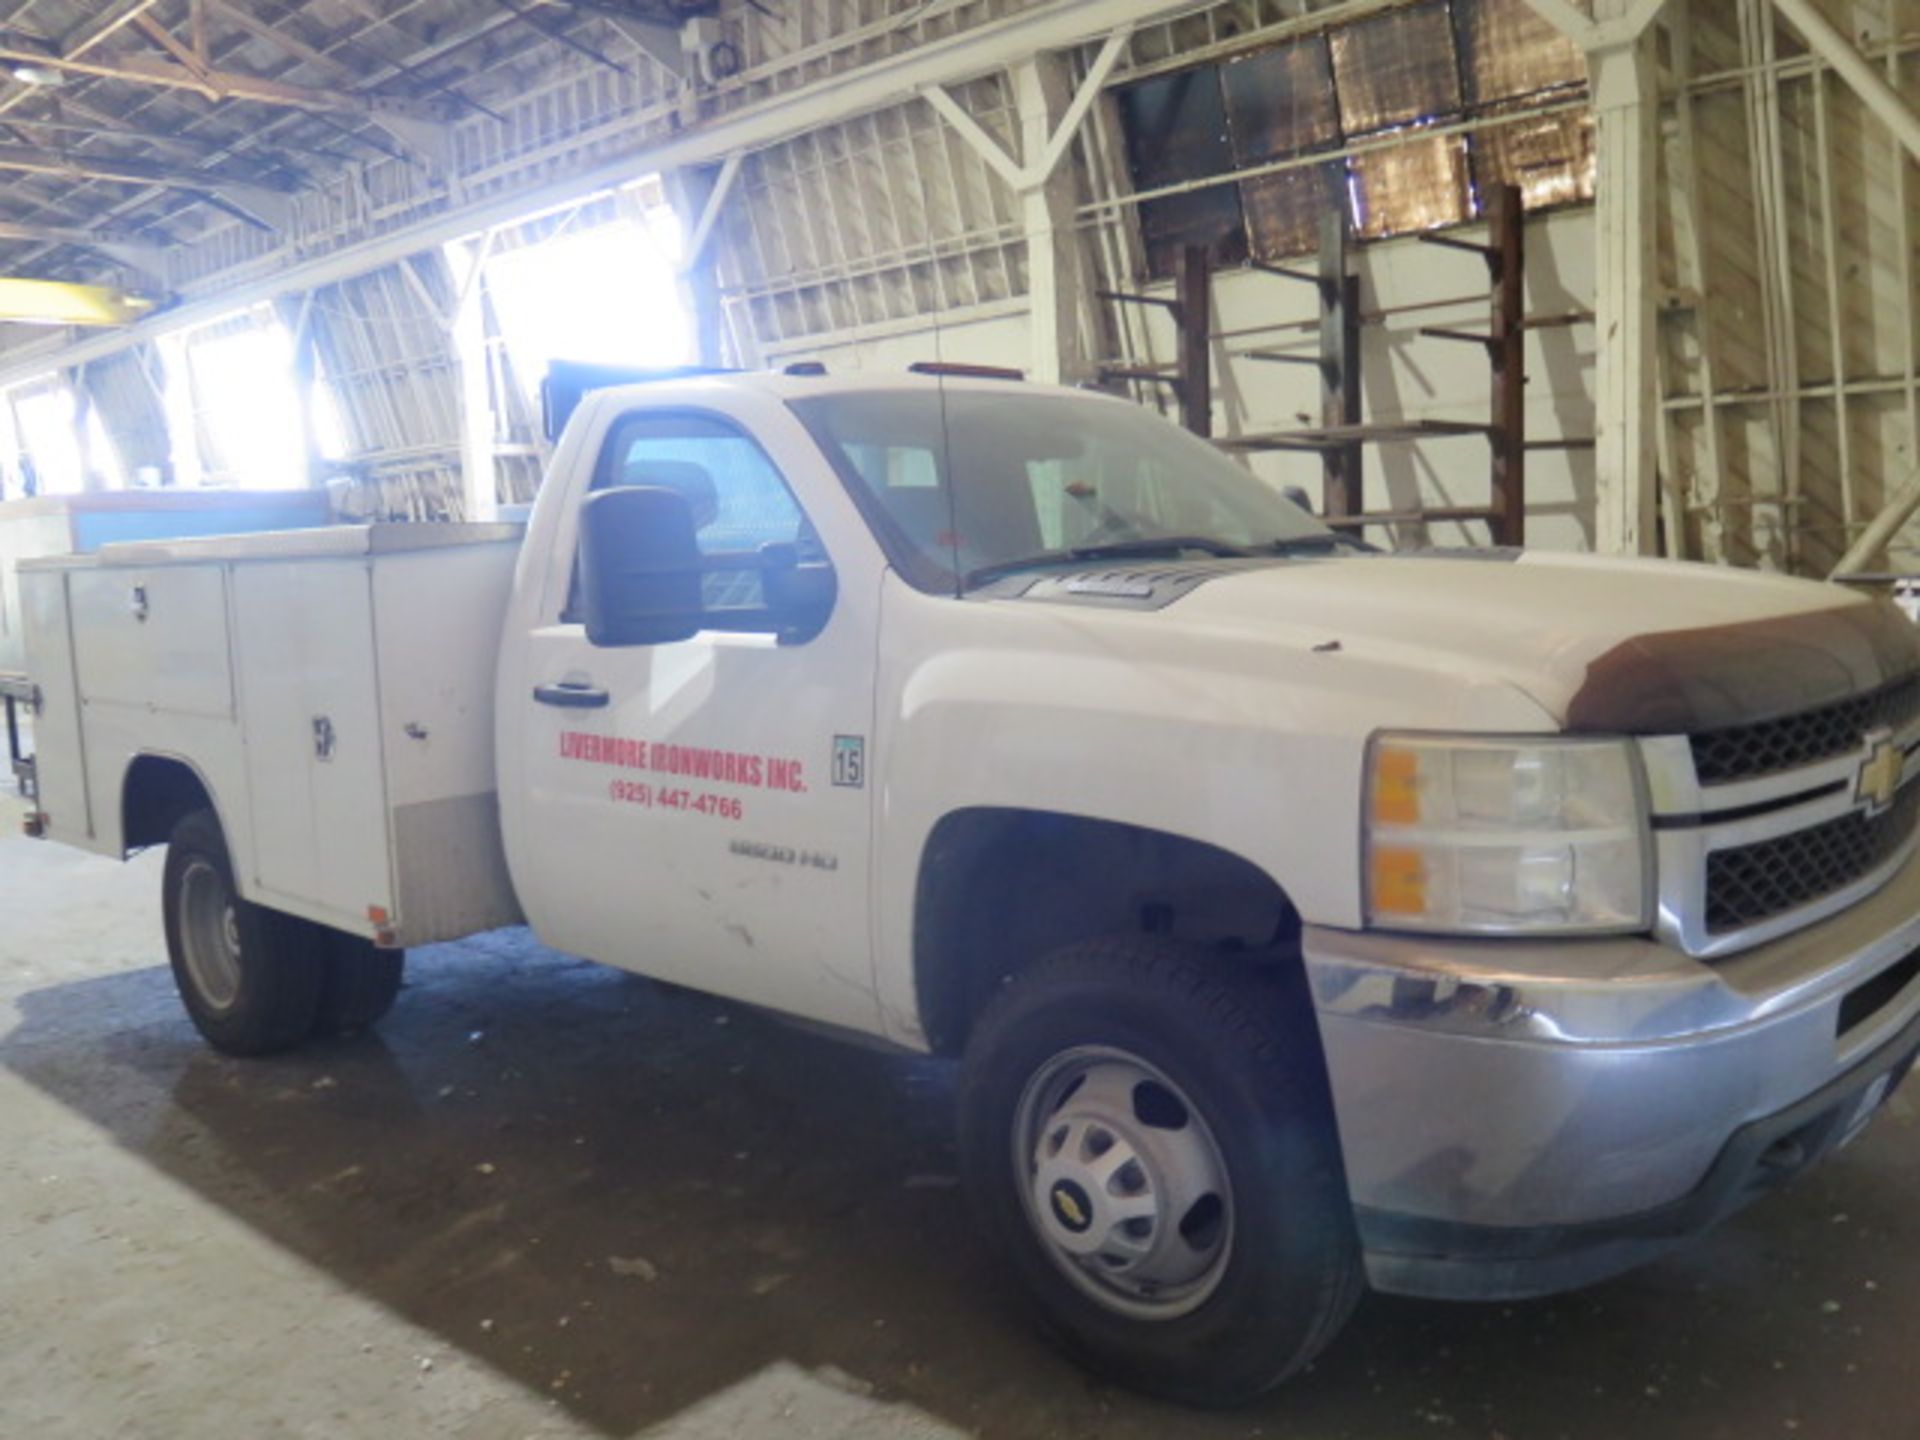 2011 Chevrolet Silverado 3500HD Service Truck Lisc# 26696D1 w/ Vortec 8-Cyl Gas Engine, SOLD AS IS - Image 3 of 23